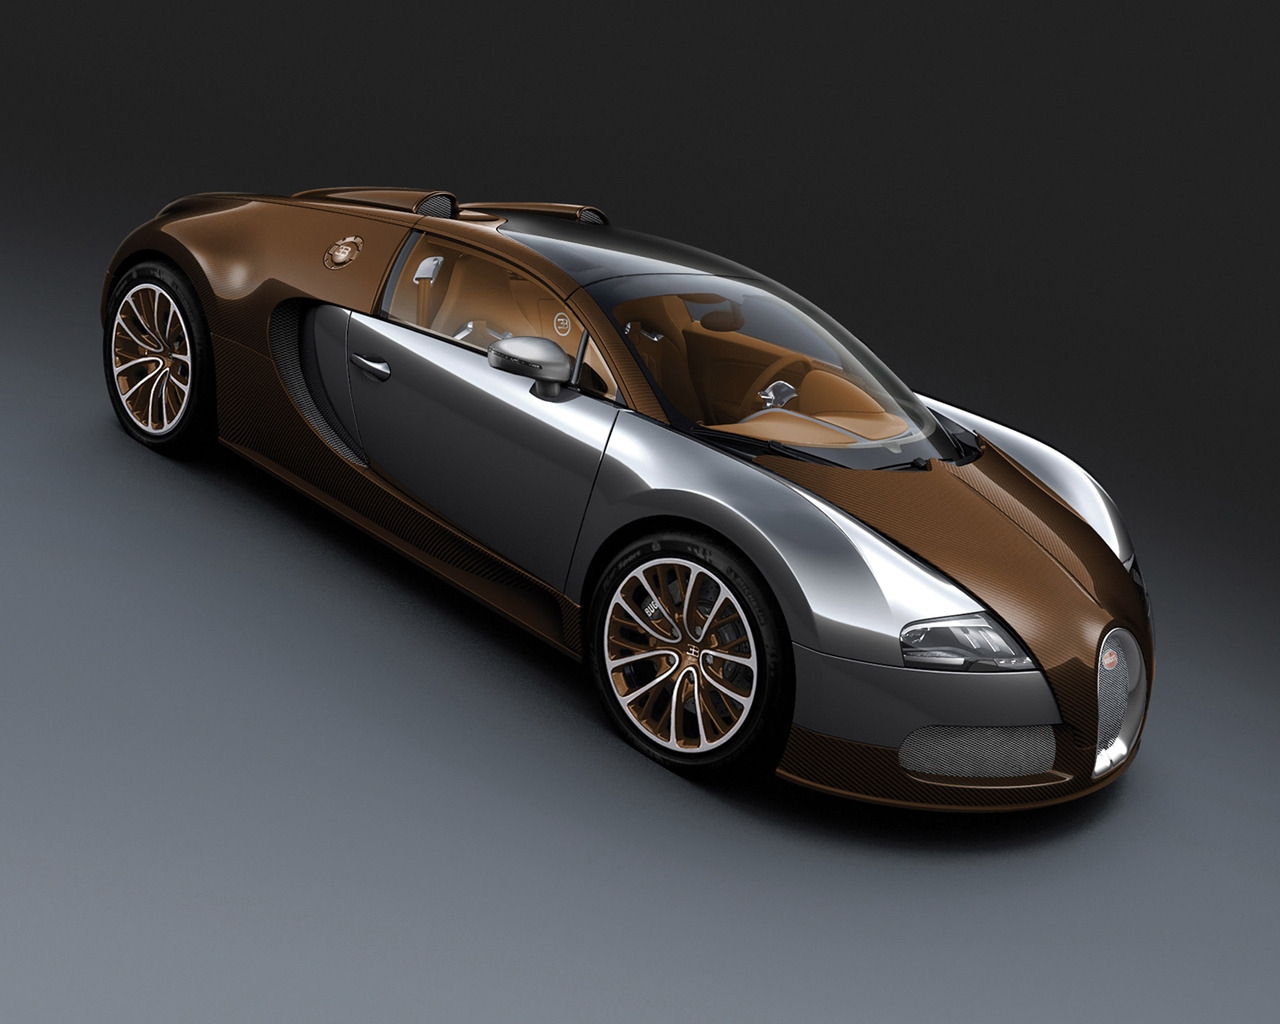 2012 Bugatti Veyron Bronce Carbon for 1280 x 1024 resolution